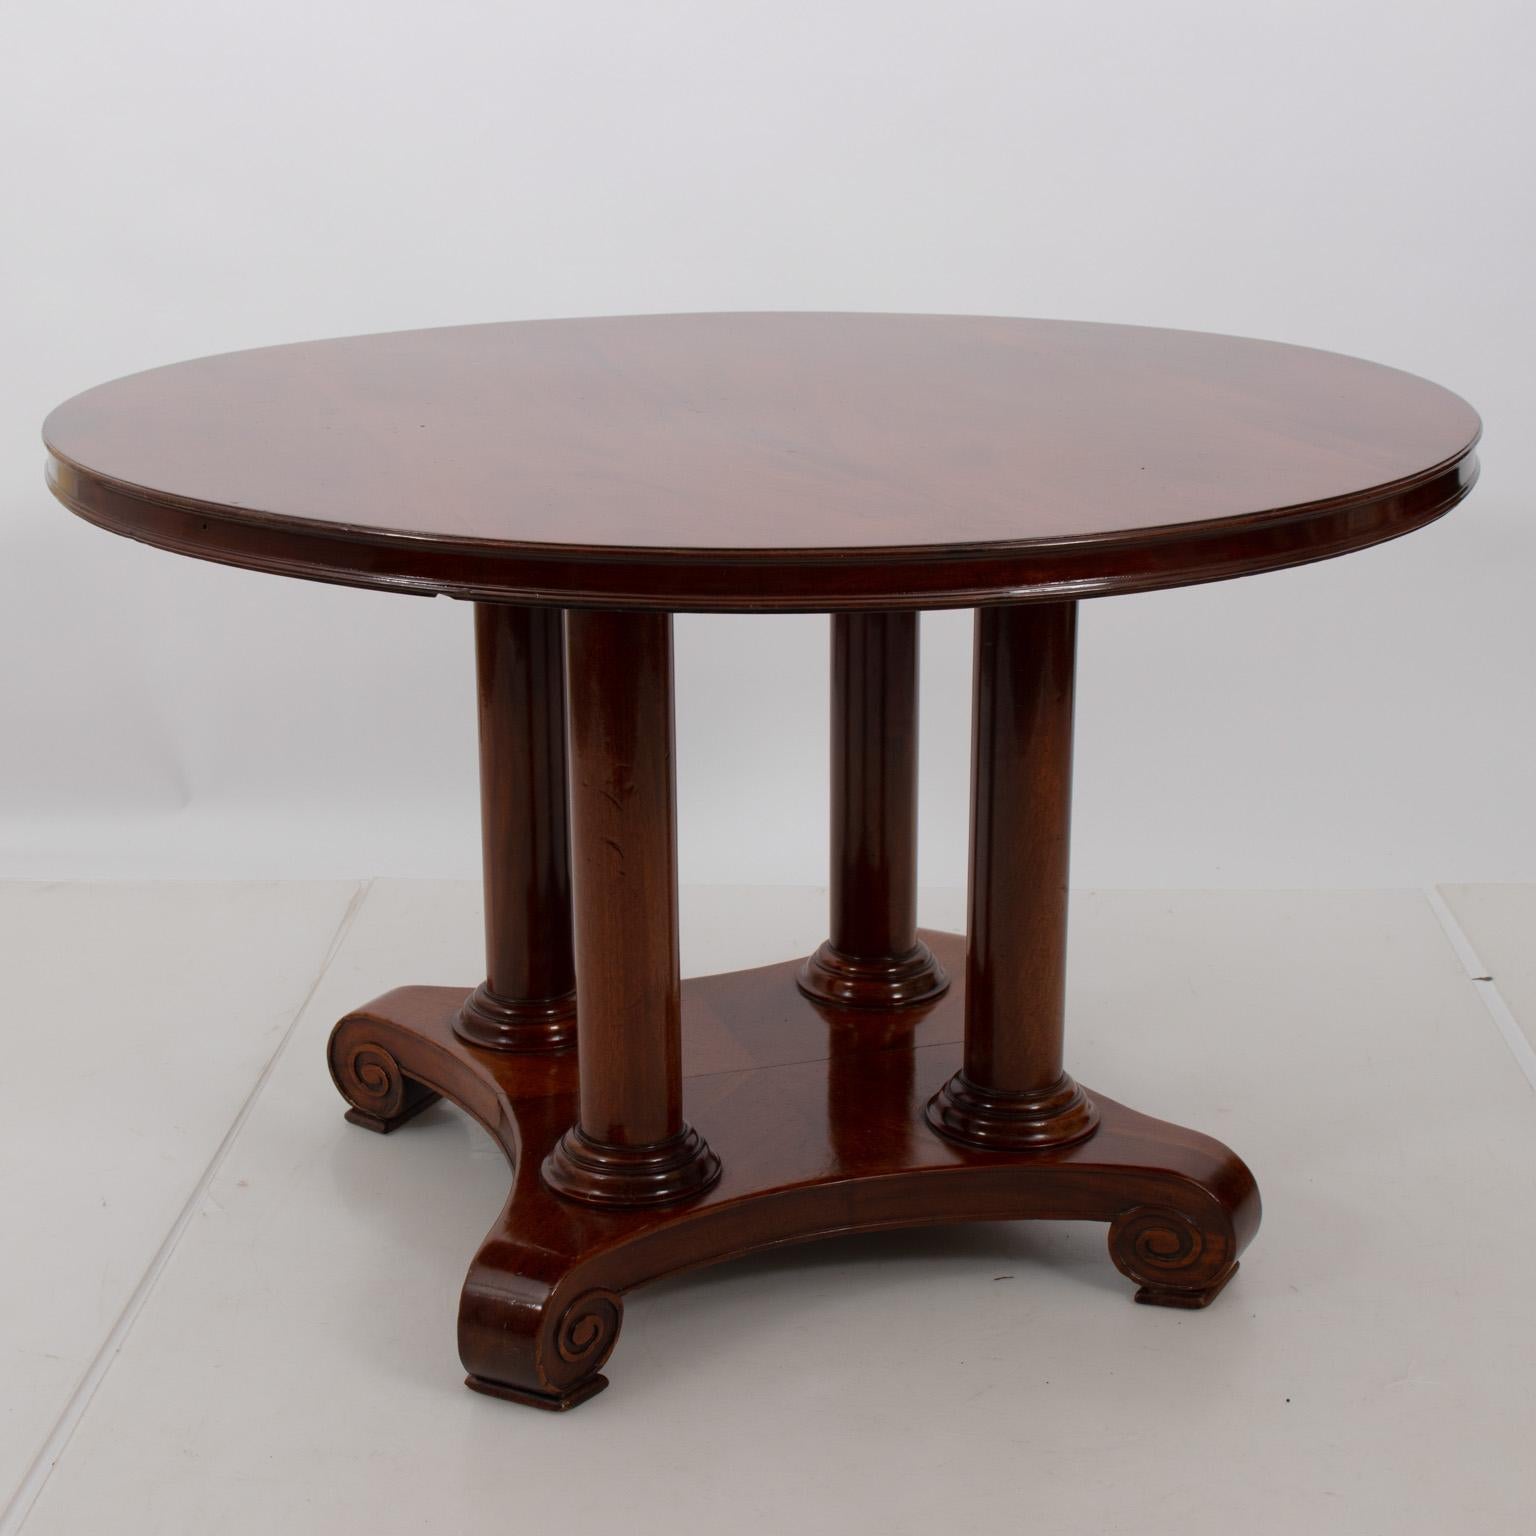 Mahogany center table in the American Empire style featuring four round columns on the base along with scrolled feet, circa 1880s. Please note of wear consistent with age including scratches and chips.